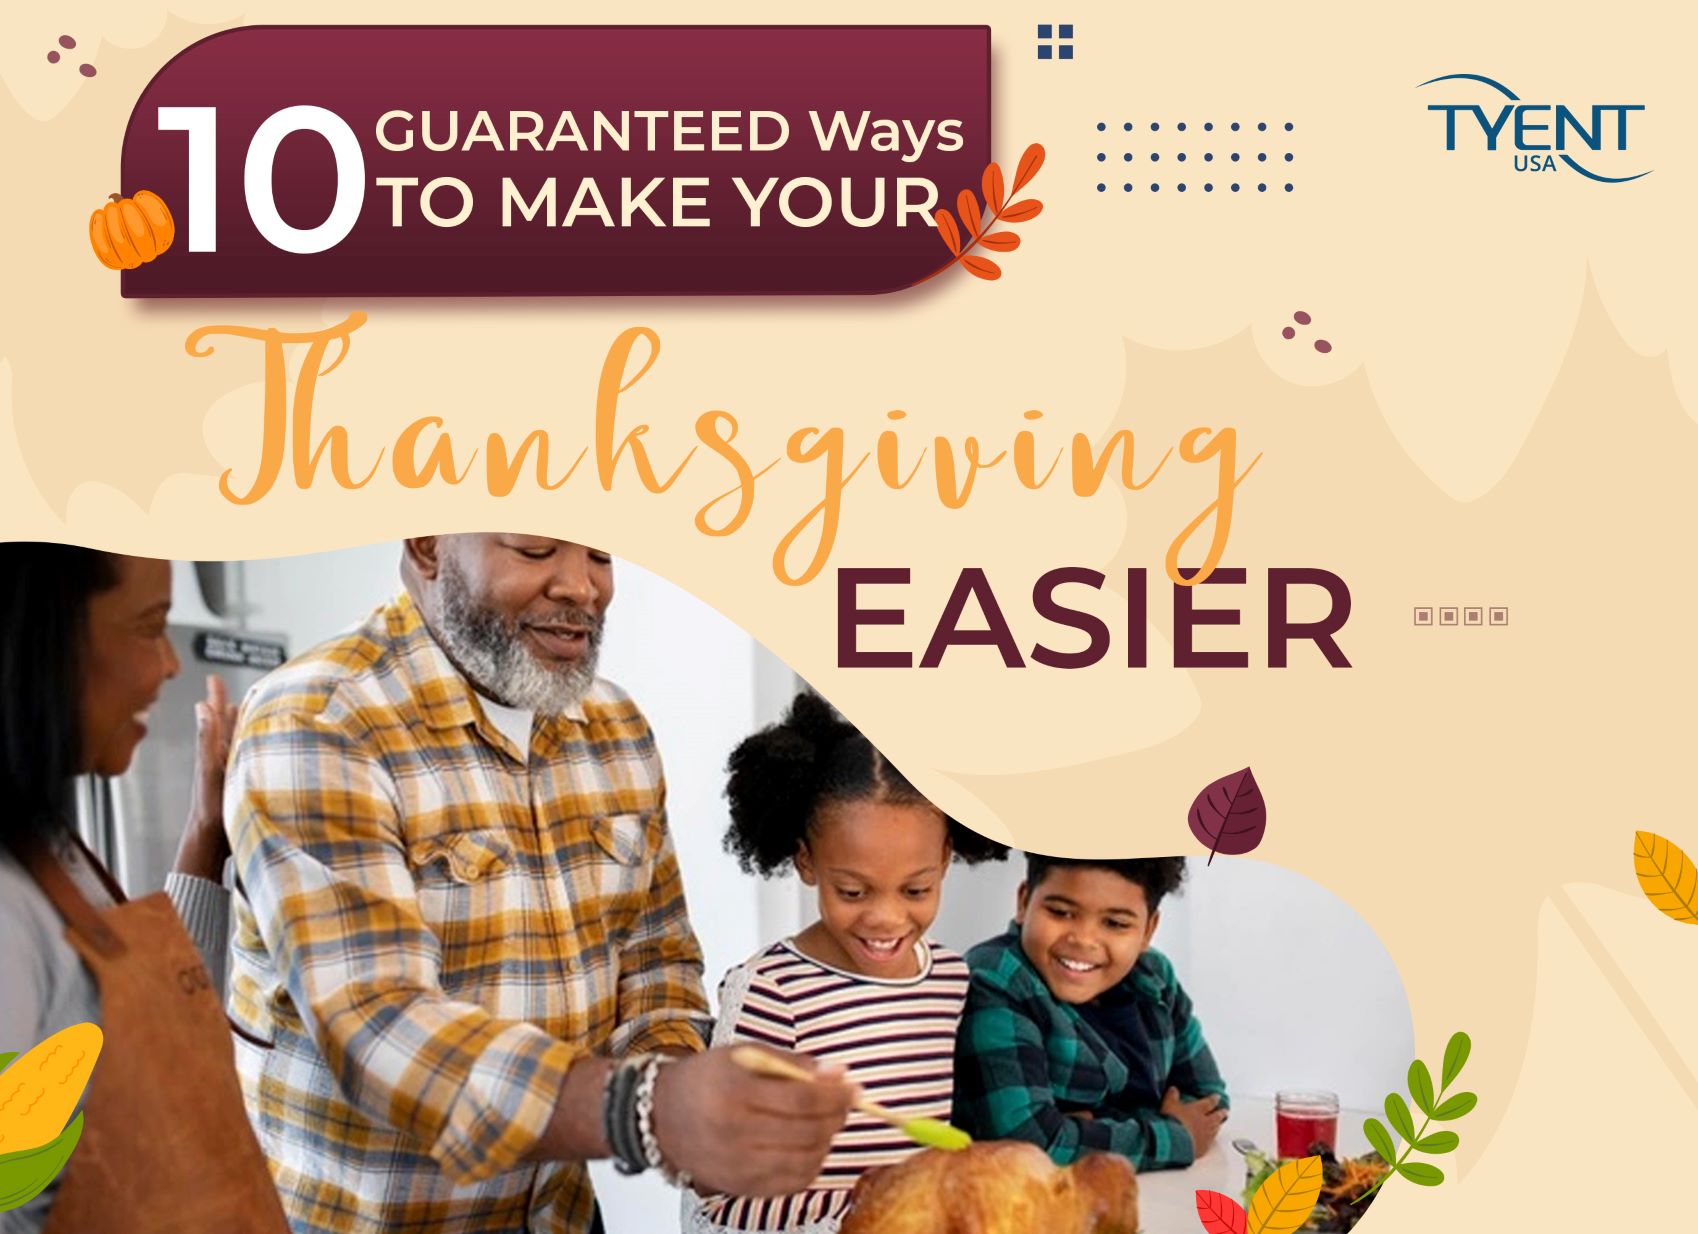 As one of our most important holidays approaches, your thoughts might turn to how much work is involved, with guests, endless food preparation and so on. But that’s normal, right? Is it even possible to make your Thanksgiving easier? It’s not only possible, but also easy! Wave goodbye to a stressful holiday – here are our 10 guaranteed ways to make your Thanksgiving easier! 1. Plan what you’re going to be eating now, and don’t look at any more recipe magazines that might tempt you away from your menu! Once you know exactly what you’ll be serving this Thanksgiving, you can make a get-ahead shopping plan to help you stay in control. 2. Once you have that shopping plan, you can also work out how much of your menu you can make – in a nicely relaxed fashion - in the days or weeks before the big day and safely stash in the fridge or freezer. 3. Thanksgiving guests staying overnight? Don’t make breakfast a big deal. Make sure that everyone knows where the coffee, cereal and bowls are, set out a covered basket of muffins the night before and fill the fridge with juice. No one needs a military-style start to the day, so make it calm and relaxed for you and your guests. 4. Here’s a brilliantly simple tip for making your Thanksgiving easier: use square and rectangle pans in the oven. They line up easily and create much more space for cooking multiple dishes at once. 5. Don’t sweat the small stuff when it comes to seasonings and condiments. No one cares if you use Dijon mustard instead of grain mustard in a dressing. It doesn’t matter if the parsley in the sauce is fresh or dried. Cut yourself some slack and focus on the joy of the main event, not the minutiae. 6. Make your Thanksgiving turkey the best tasting ever by taking a tip from top chefs and marinating it in brine the night before. There is no easier way to dial up the flavor and keep the turkey nice and moist! 7. Still with the turkey, remember to take the temperature of your Thanksgiving turkey at several points – and never next to the bone. Make sure you get a reading of 165 degrees at the mid-thigh, wing and the thickest part of the turkey breast. Once you have that, take your turkey out and rest it for between 30 minutes and one hour. 8. One guaranteed way of making Thanksgiving morning easier is to lay the table the night before. You’ll be so pleased you did it the following day! 9. Delegate! Guests often ask if they can do anything to help, so accept the offer. Easy jobs like filling buckets with ice to chill drinks and free up fridge space, cutting bread and filling the water jugs are time-consuming jobs but easy ones to delegate. Guests love to feel useful and helping hands really do make your Thanksgiving easier! 10. Finally, it’s not cheating to buy in ready-made elements of the Thanksgiving feast. If you want to pick up a few side dishes or desserts to give a greater choice or make the big day easier, then do so, guilt-free! Remember: don’t work so hard that you skip drinking enough water! Dehydration is a fast way to feel sluggish. Drink Tyent hydrogen water for extra energy this Thanksgiving! Do you have a few of your own tips to make your Thanksgiving easier? Please share them!